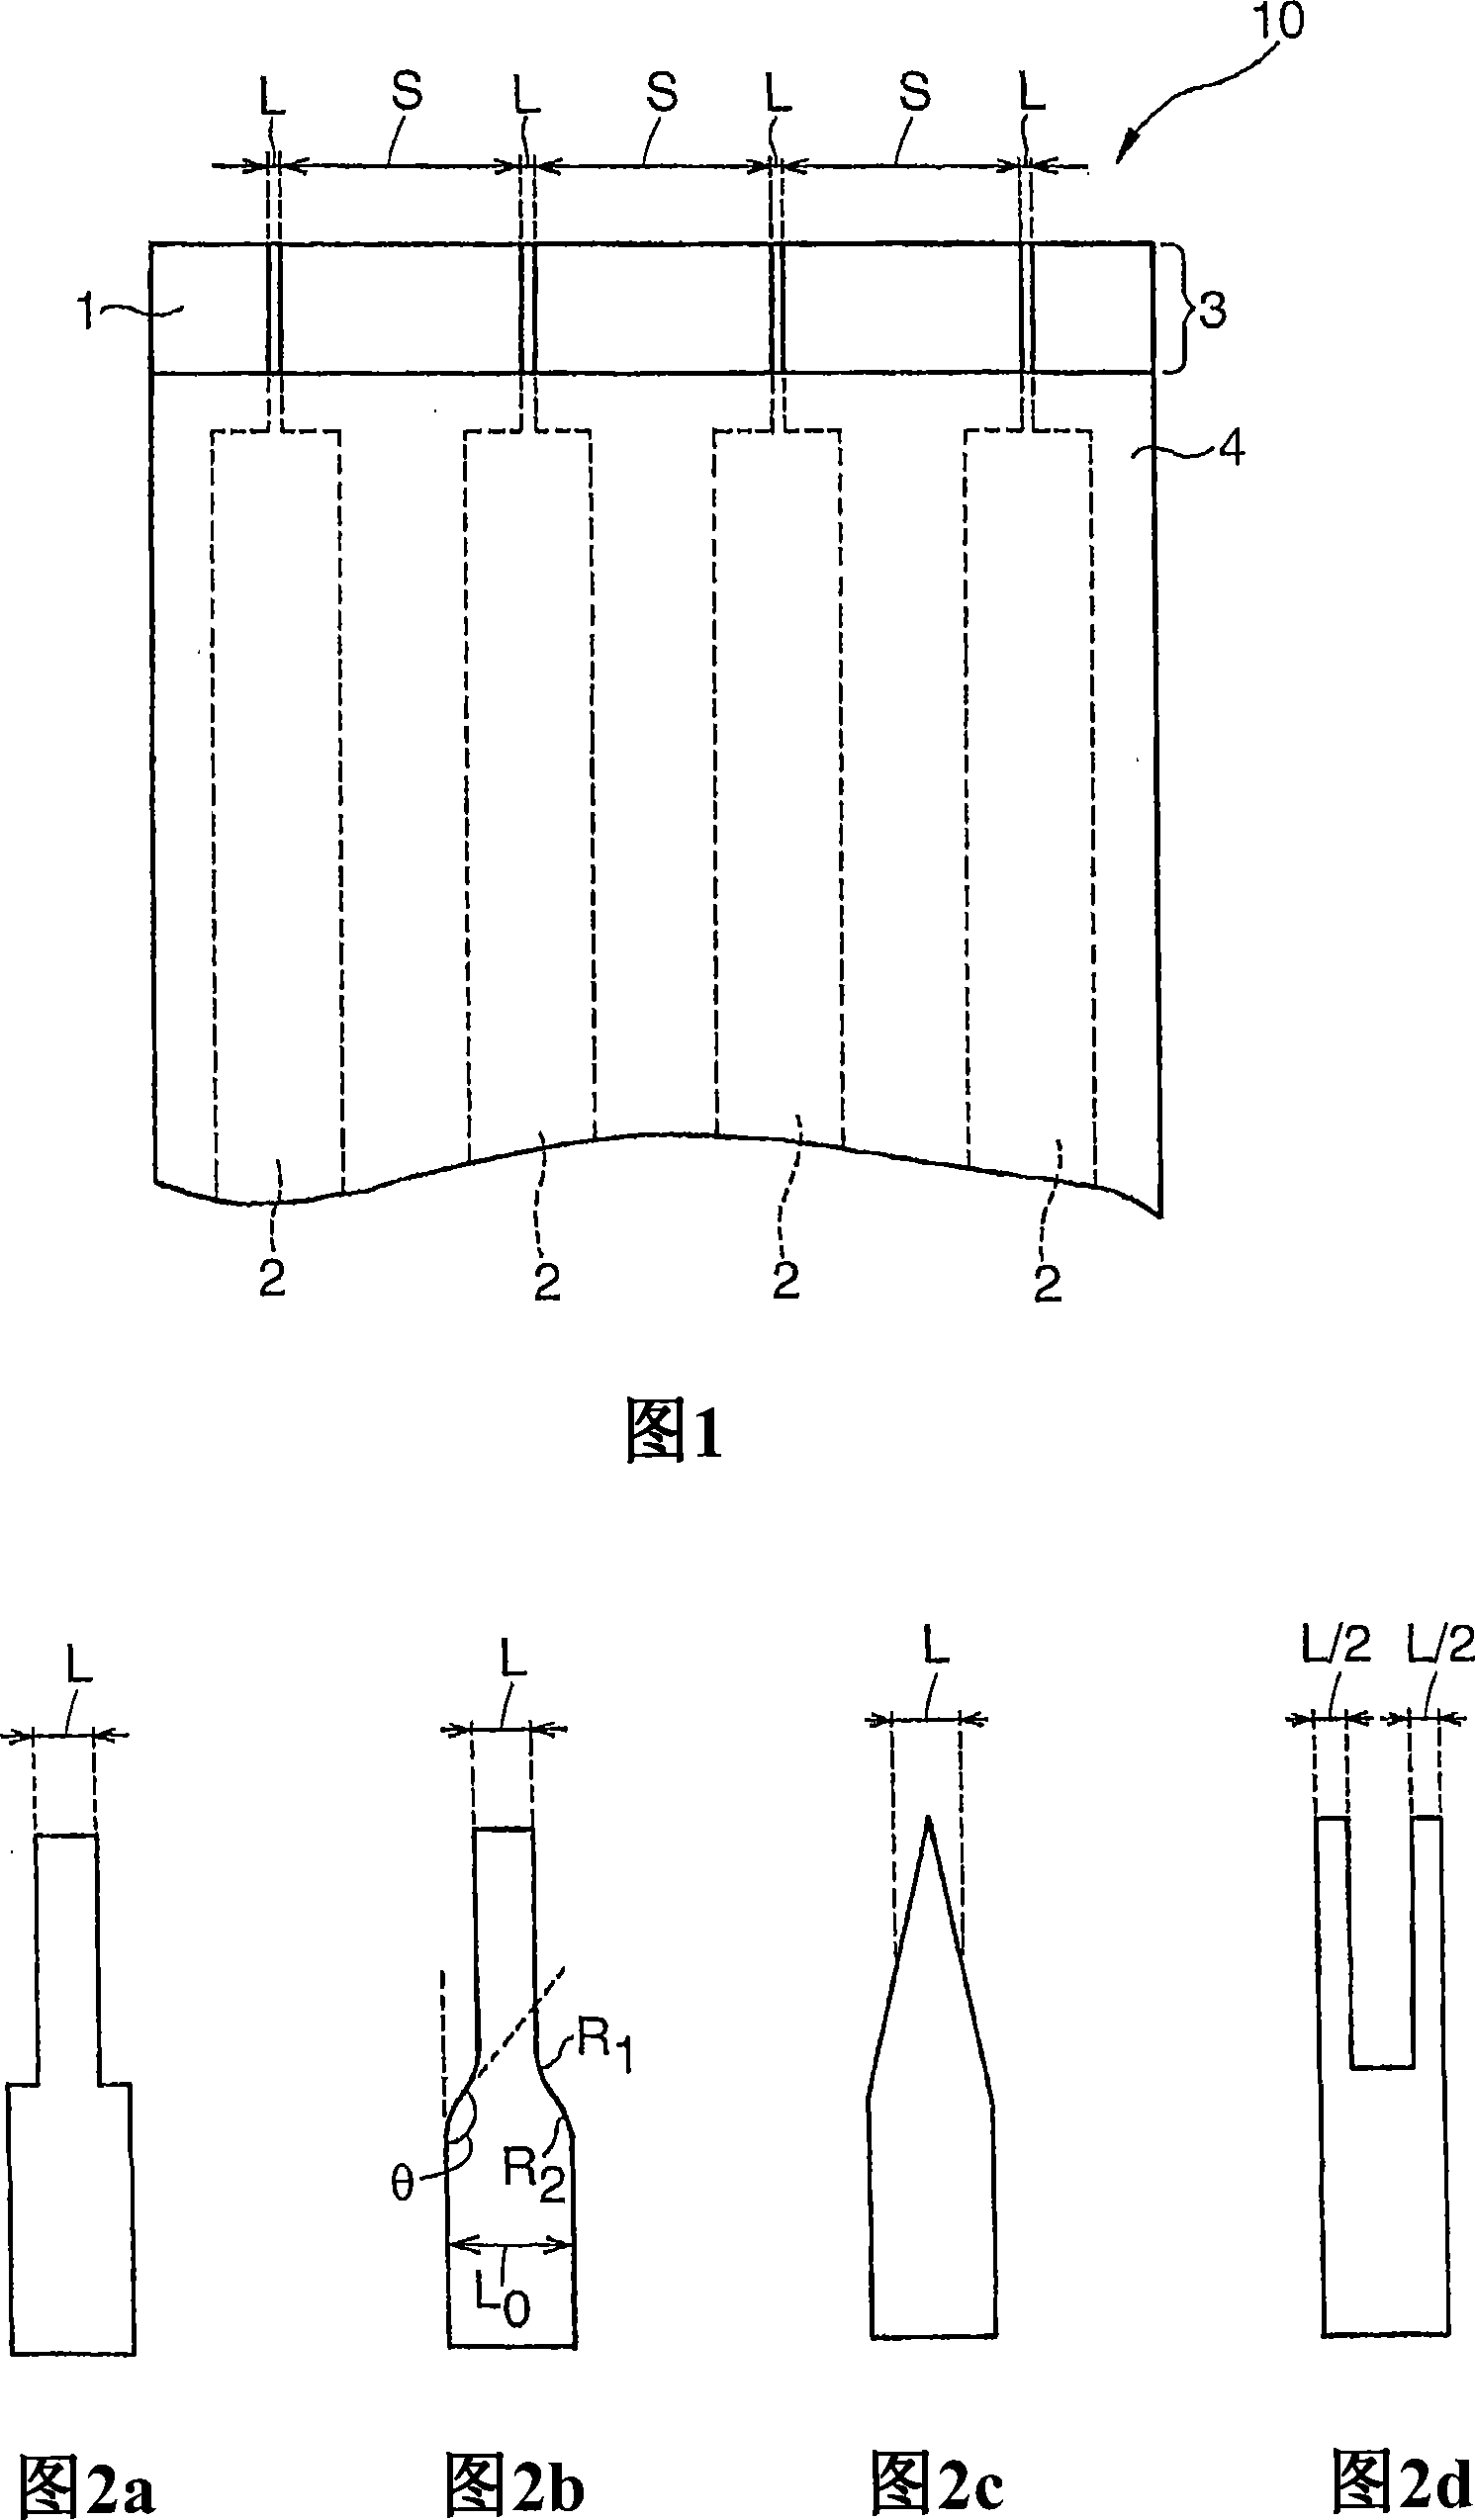 Method for connecting flexible printed circuit board to another circuit board